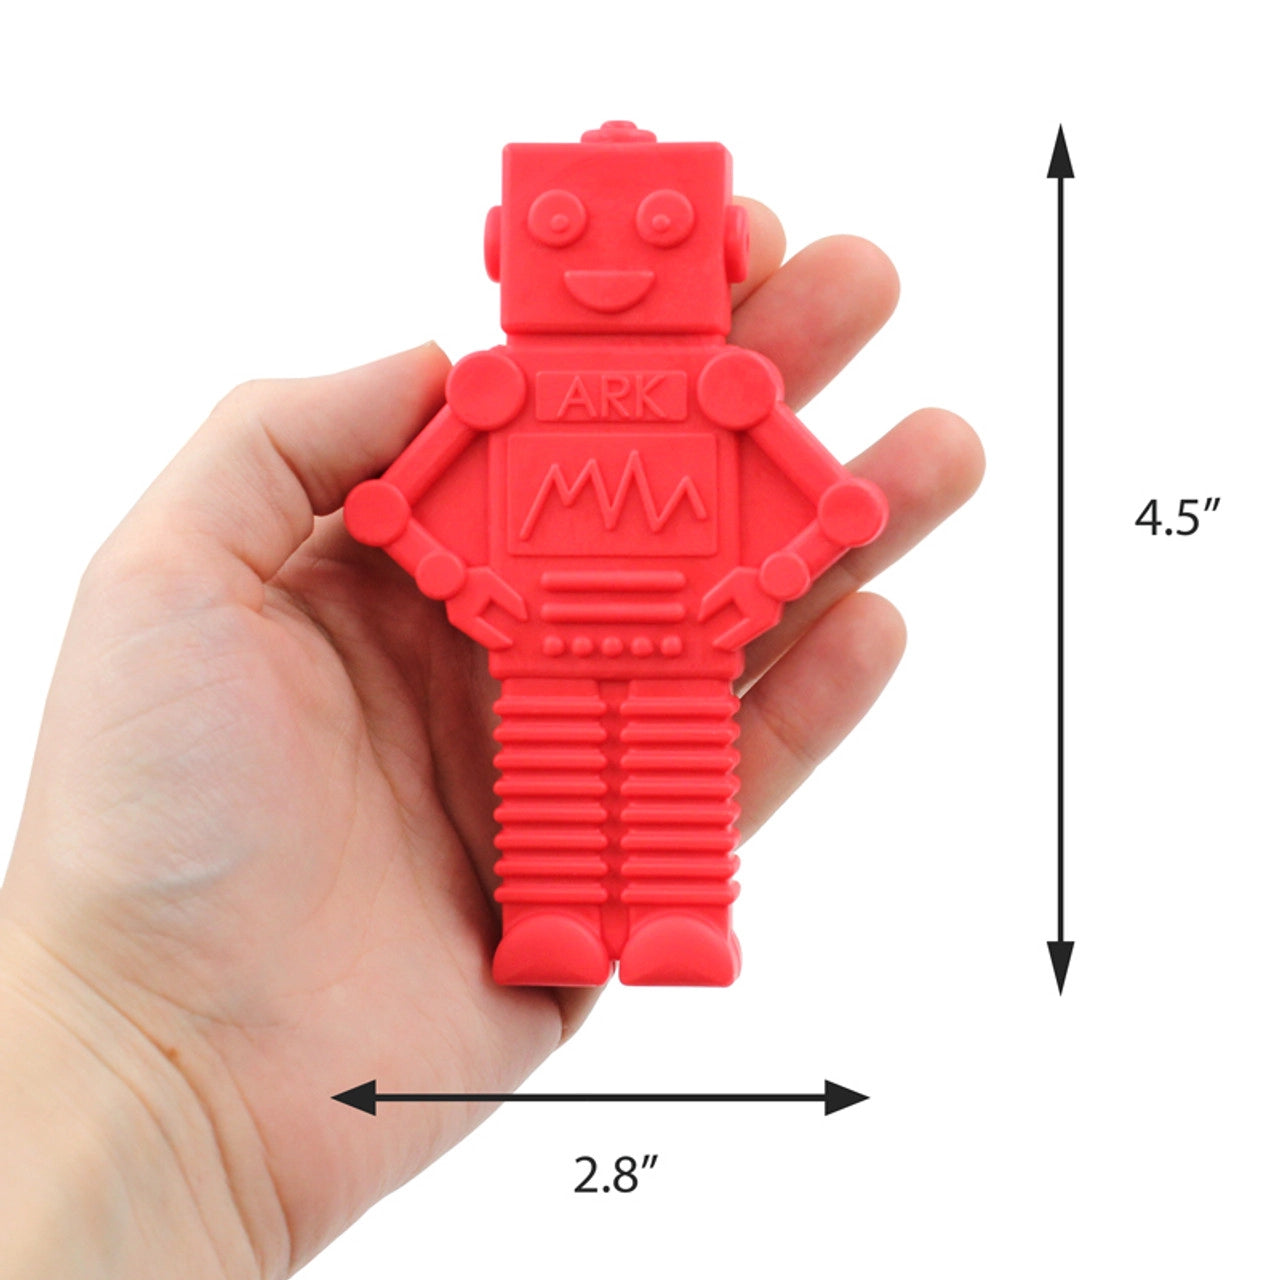 ARK'S_MEGA_ROBOCHEW_ROBOT_CHEWY_red_4.5"_tall_by_2.8"_wide 